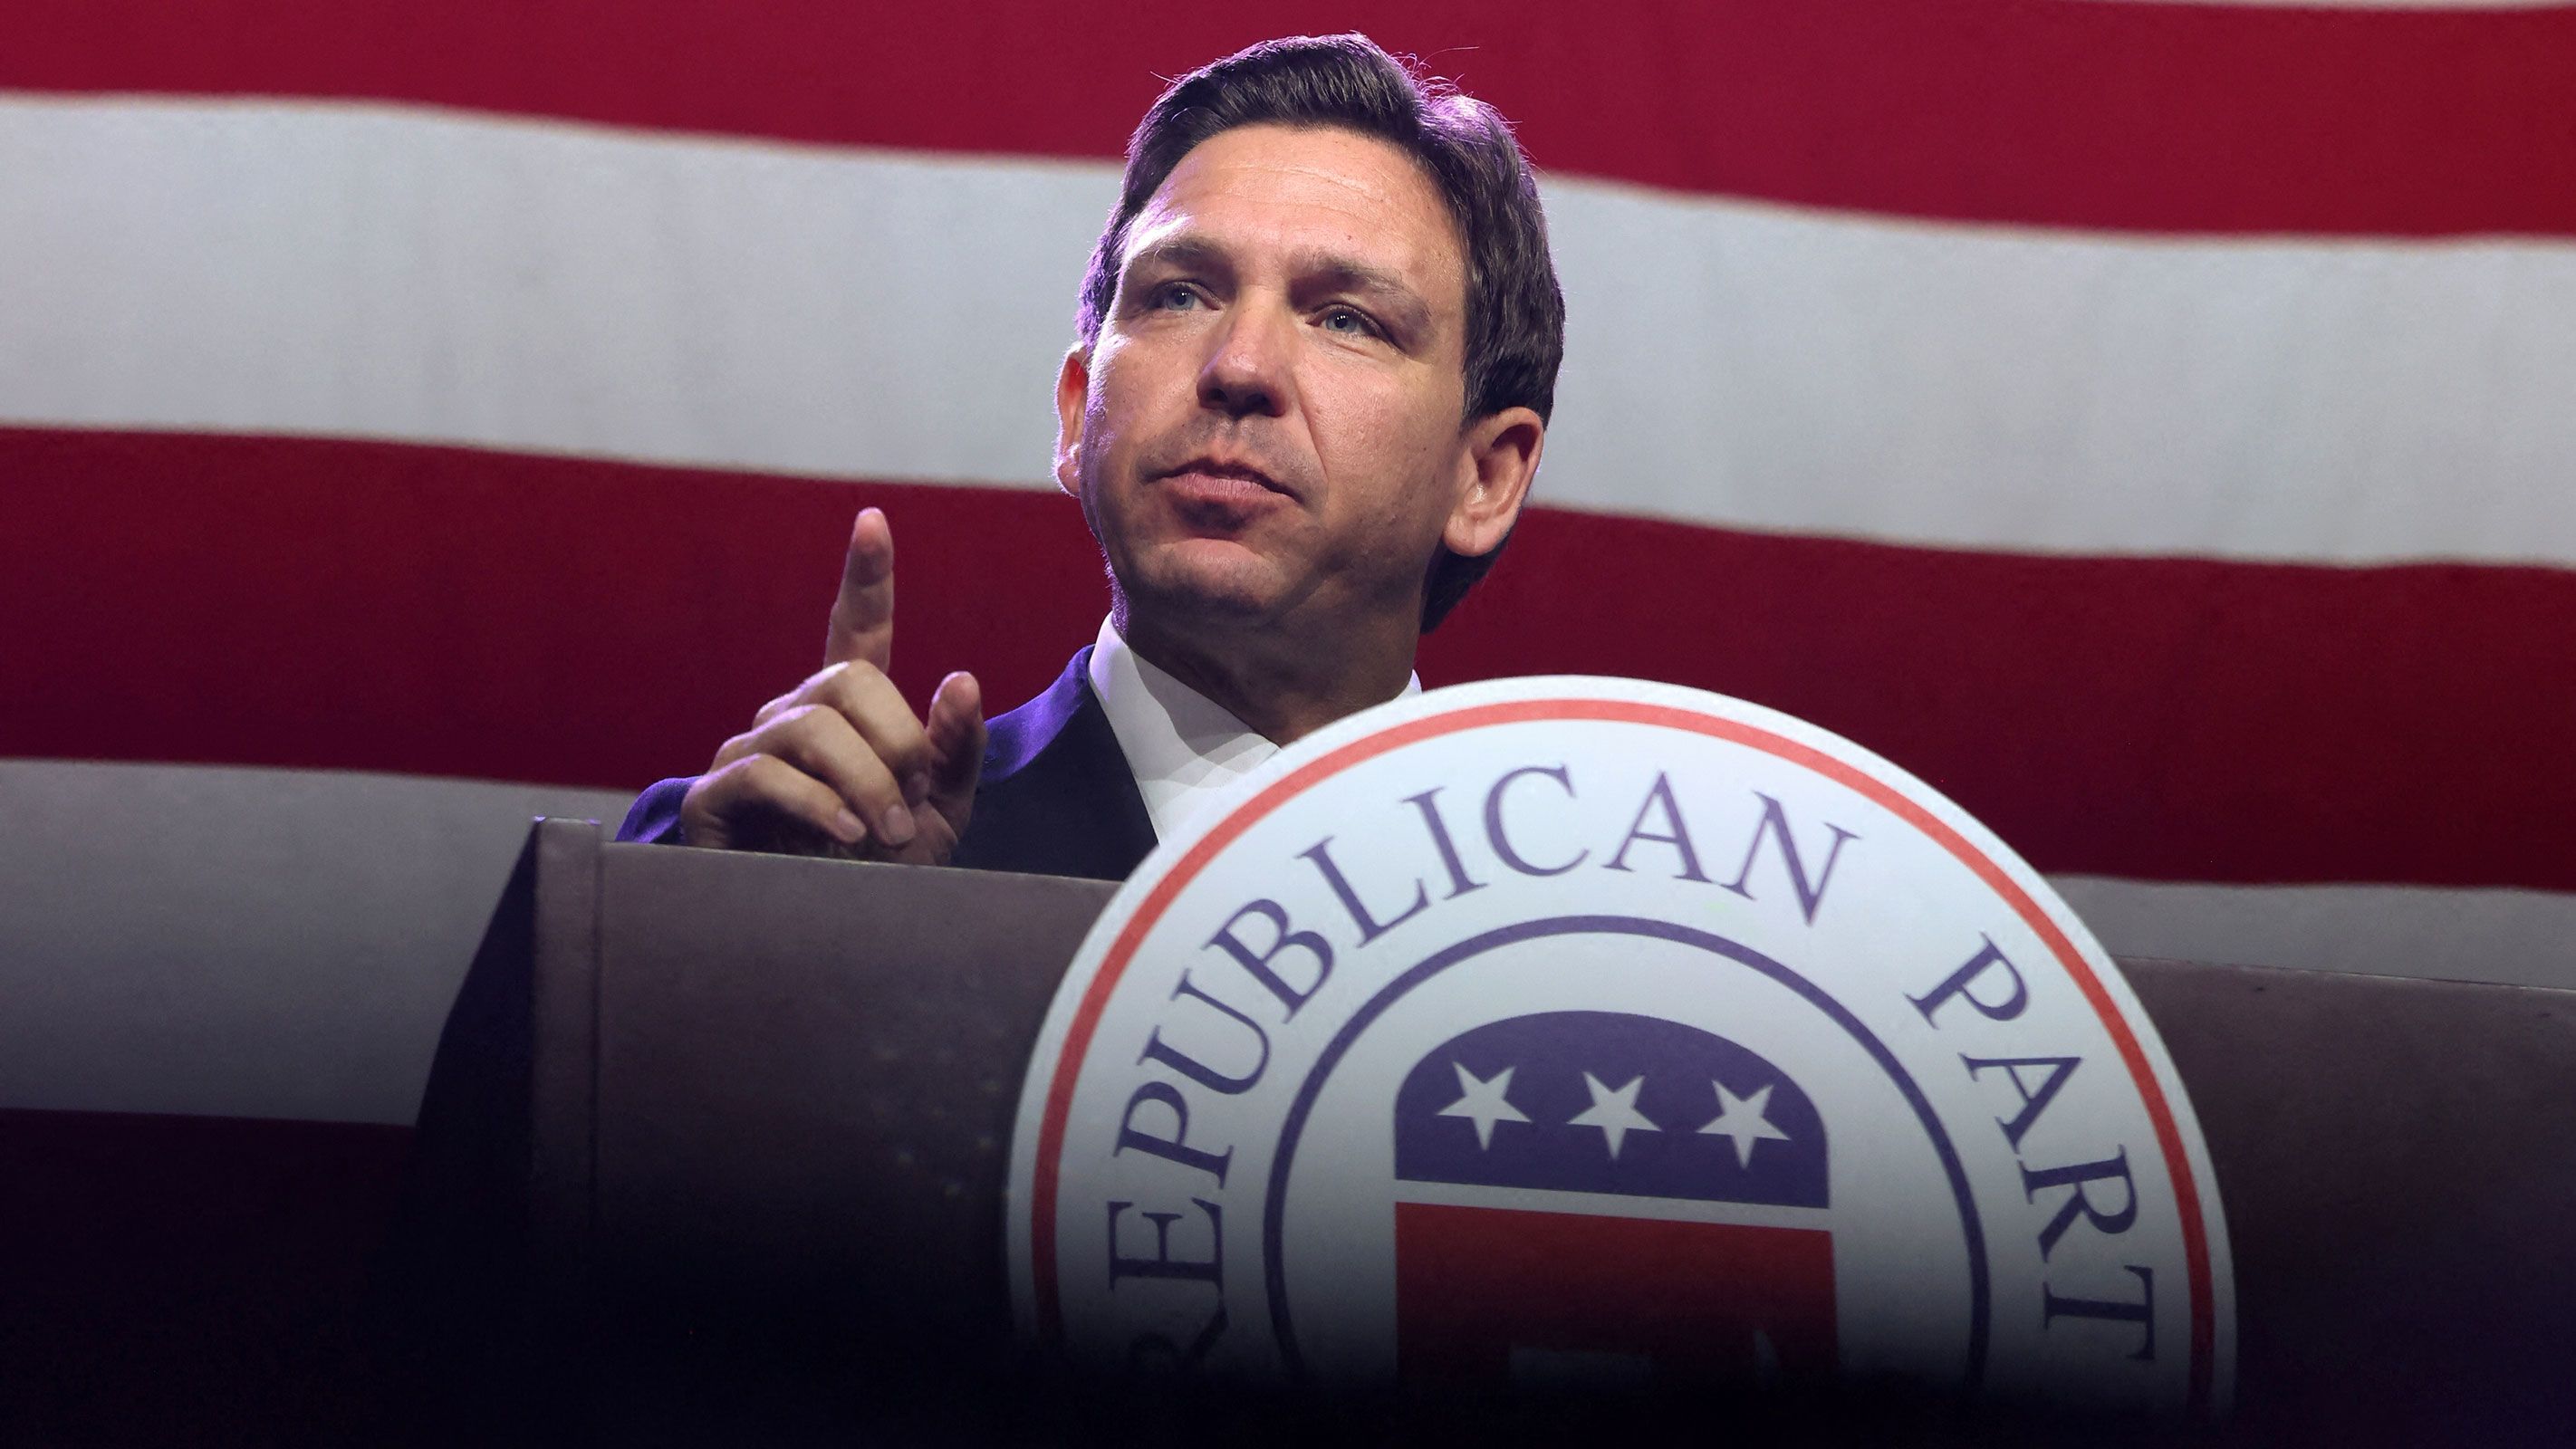 Can Ron DeSantis Displace Donald Trump as the G.O.P.'s Combatant-in-Chief?